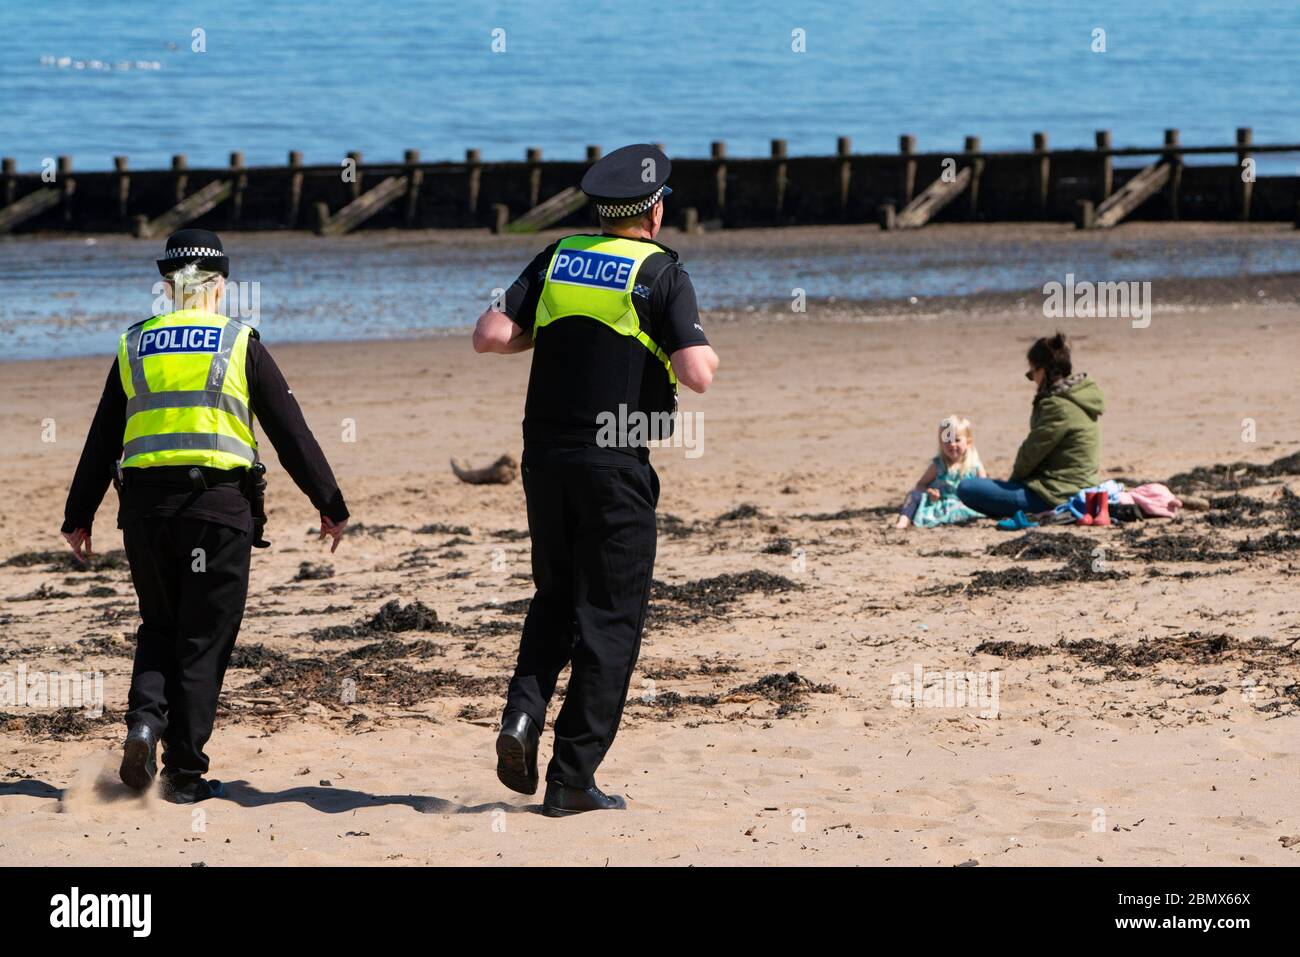 Portobello, Scotland, UK. 11 May 2020. Police patrolling promenade and beach at Portobello this afternoon in warm sunny weather. They spoke to the public who were sitting on the beach or on sea wall asking them to keep moving. Iain Masterton/Alamy Live News Stock Photo